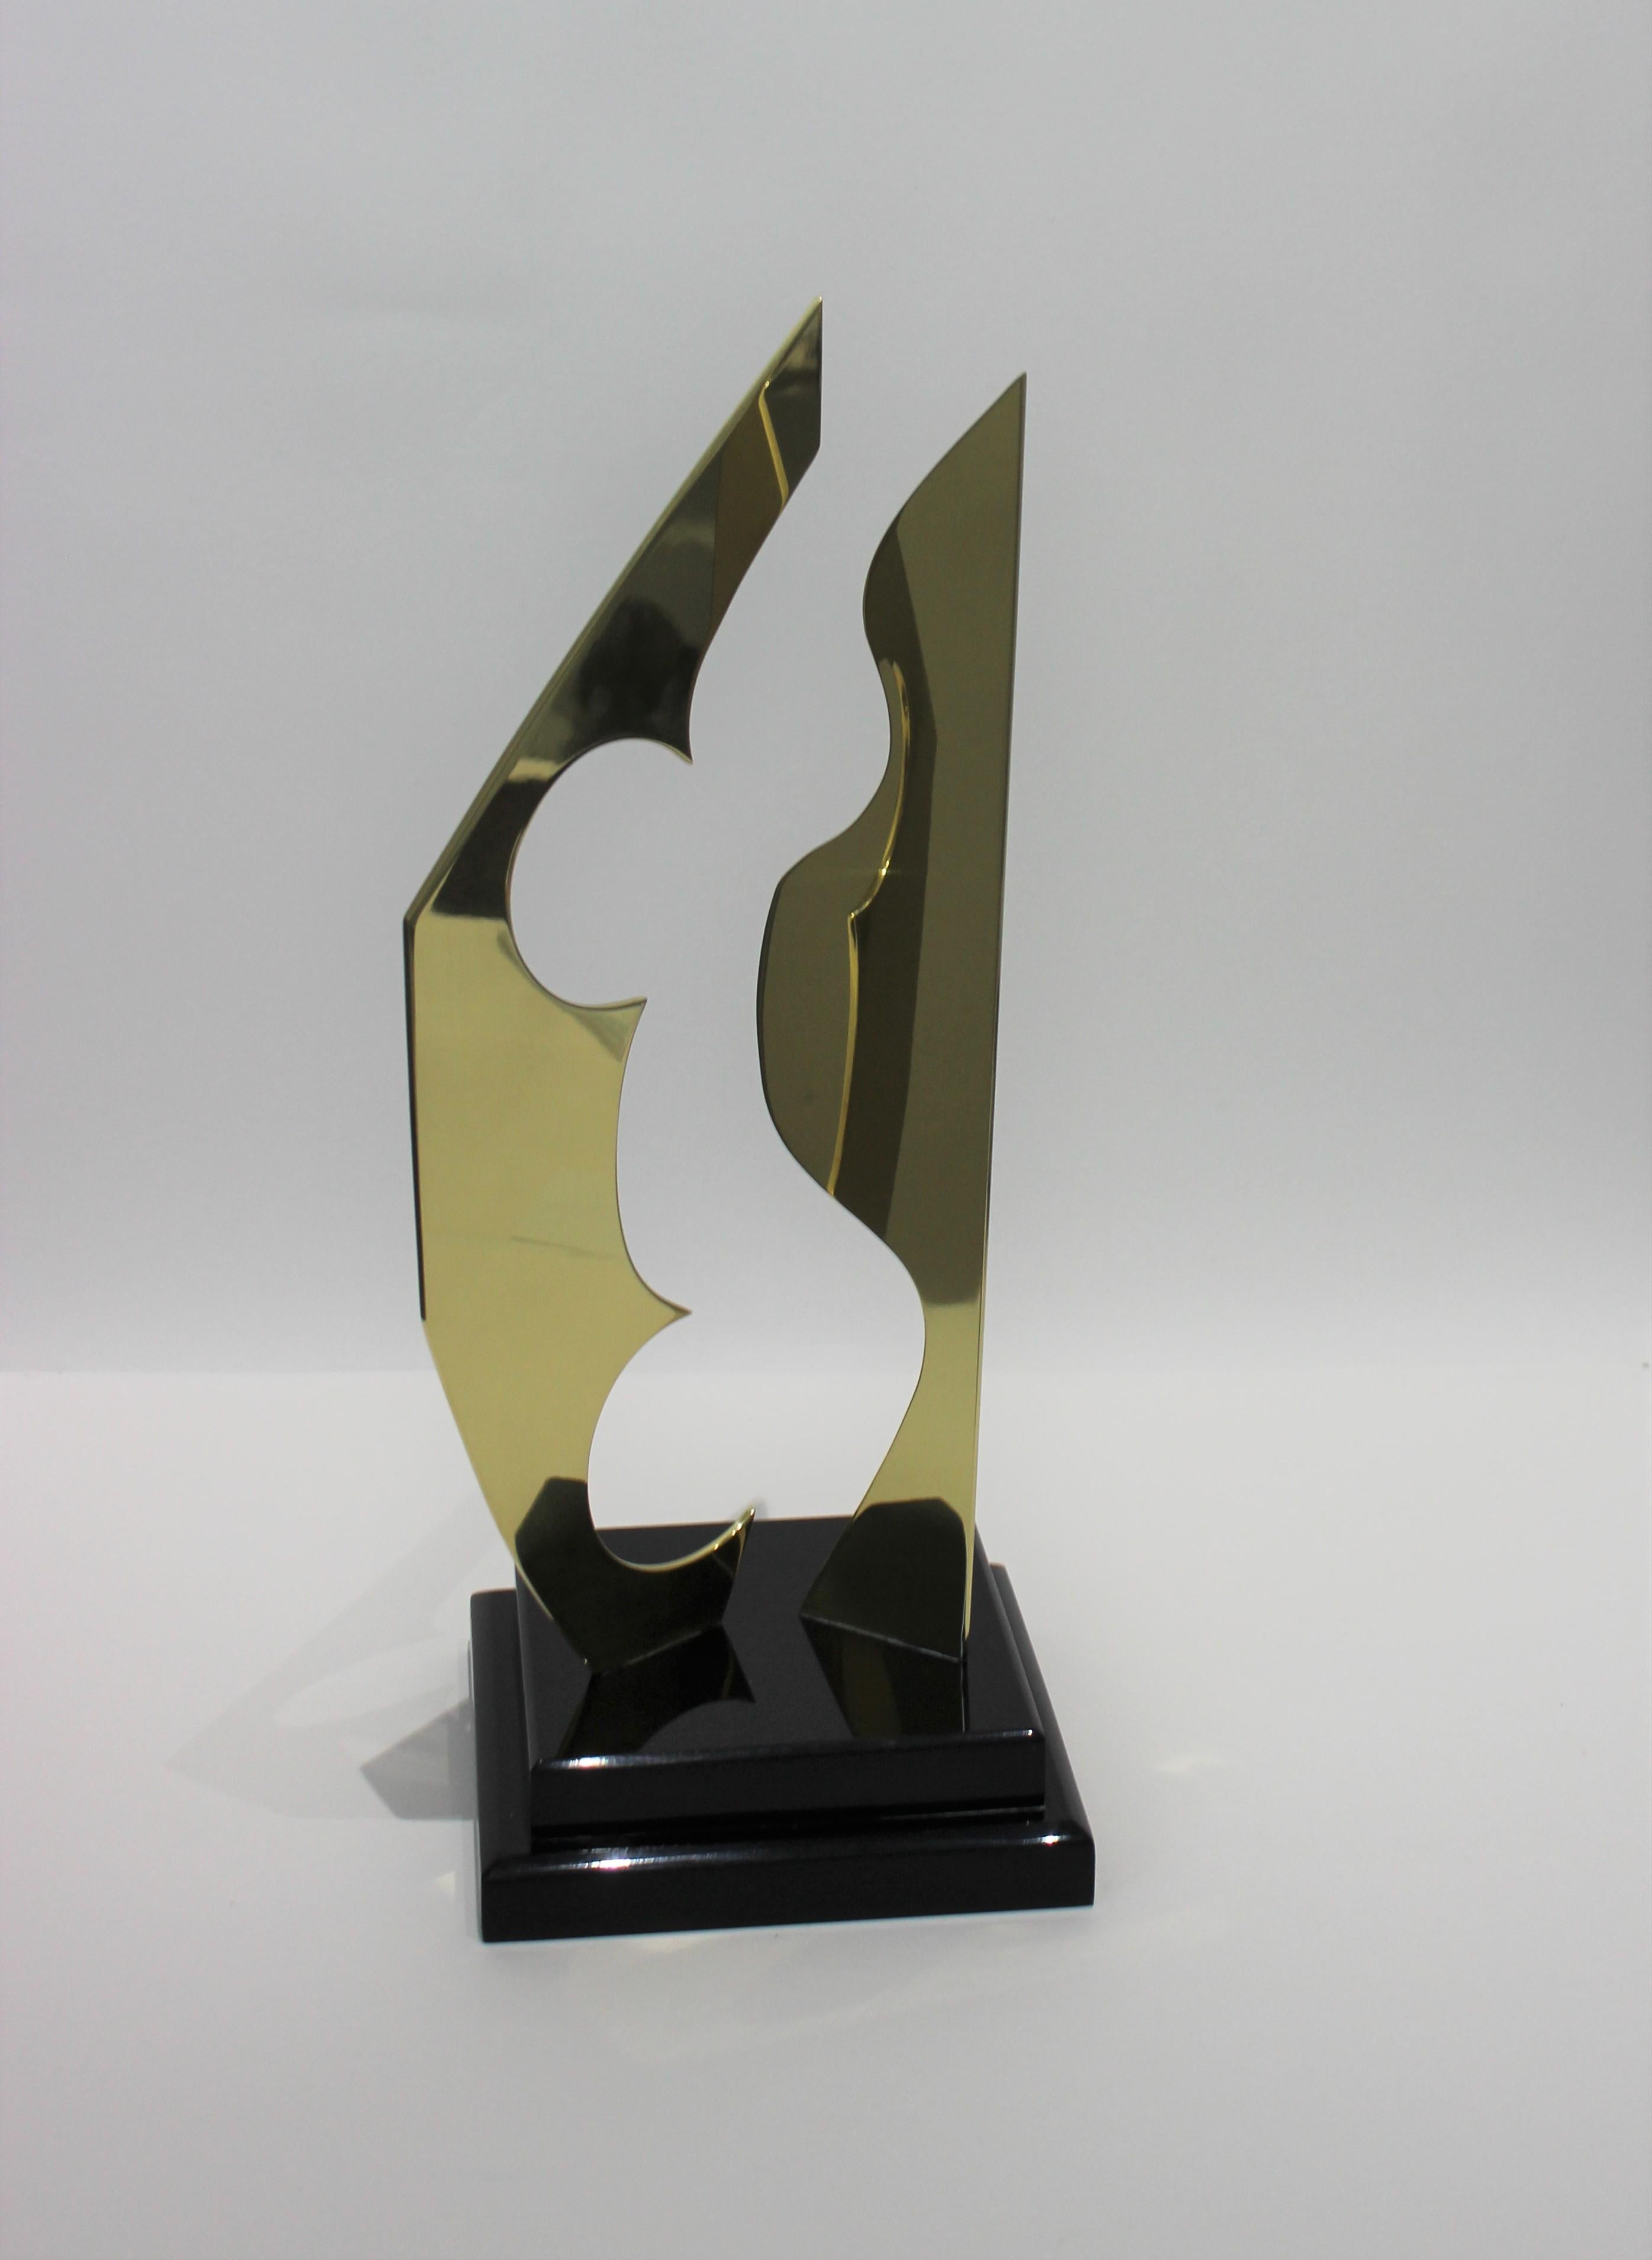 Hivo Van teal signed abstract sculpture in polished brass and black Lucite from a Palm Beach estate

has been professionally cleaned and polished.